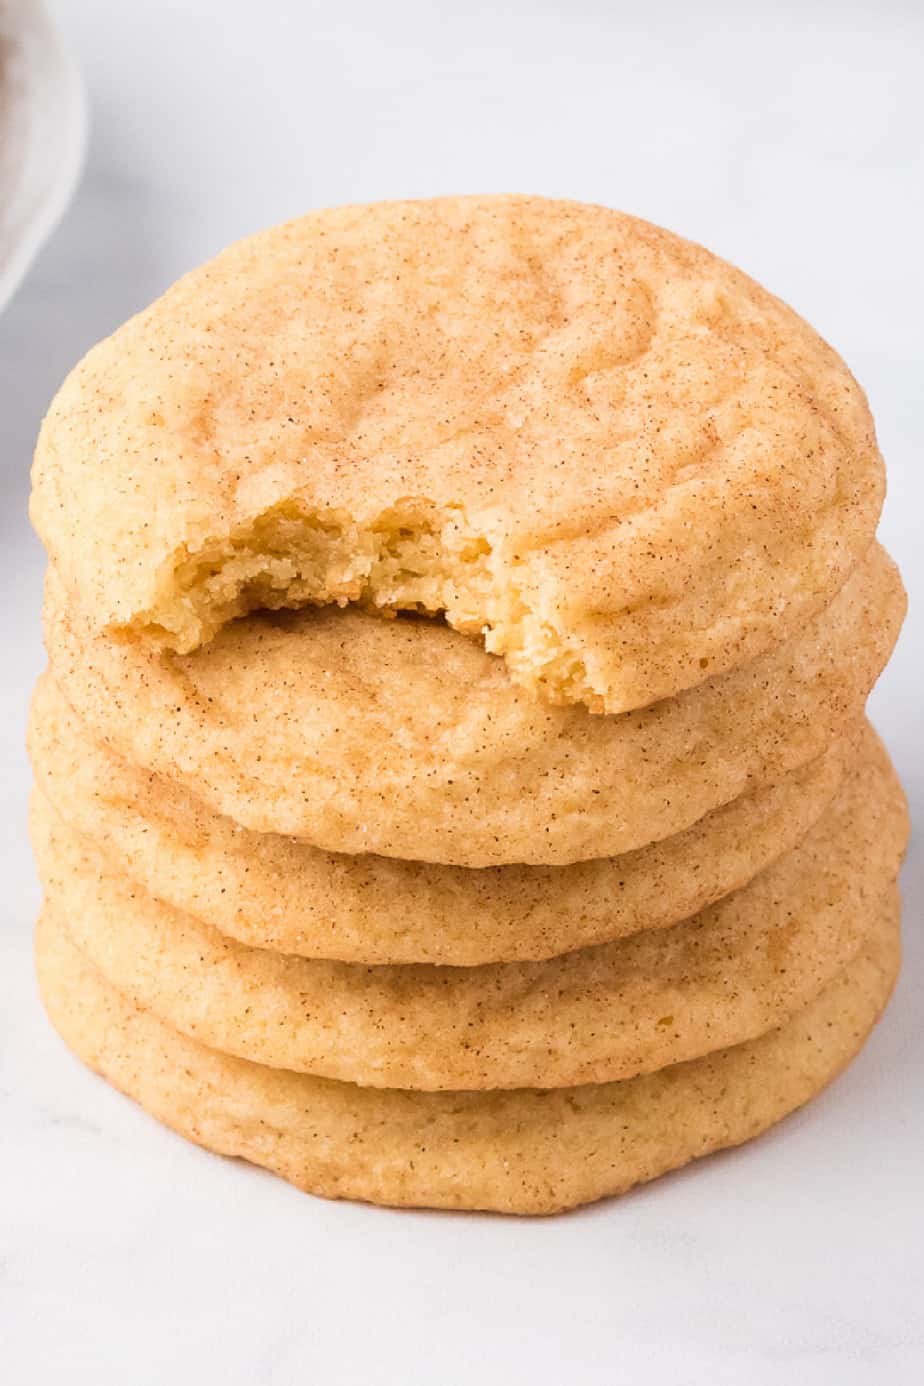 Stack snickerdoodle cookies with a bite missing from the top cookie from an angle on a white counter.